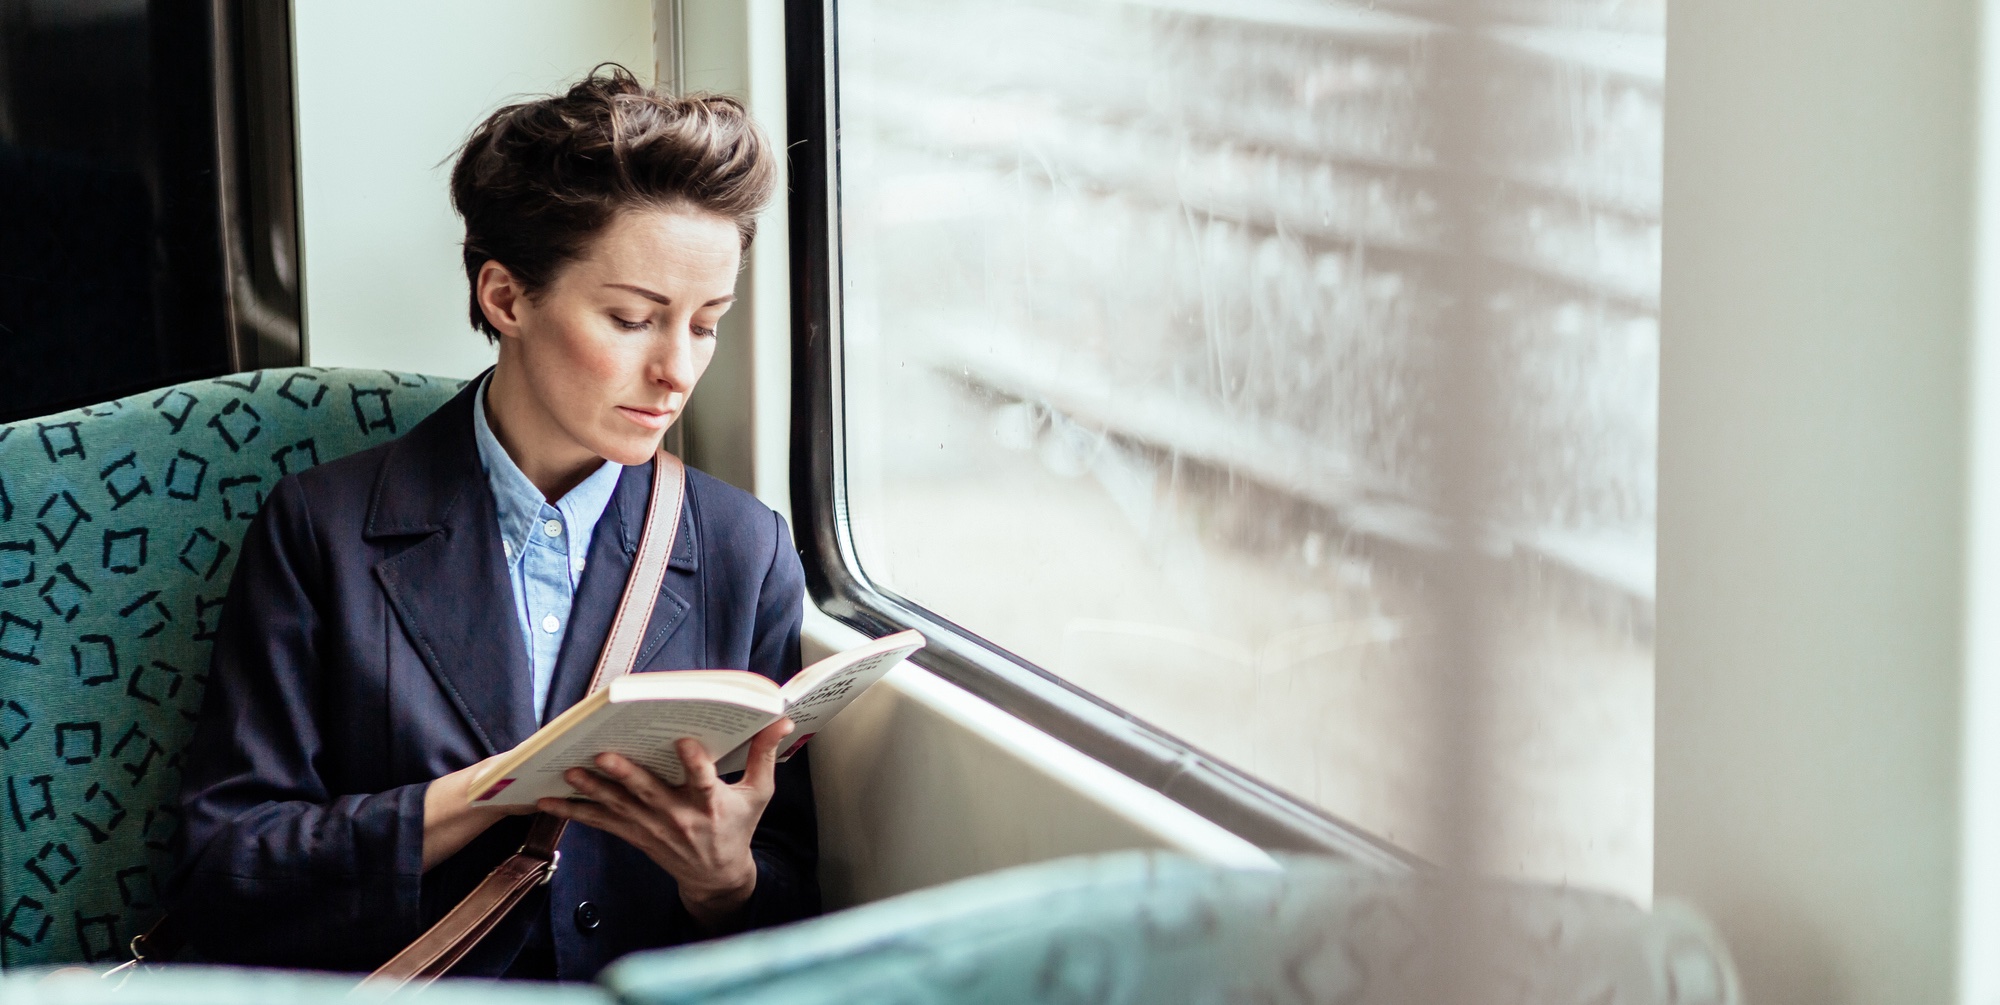 Mature businesswoman reading a book while travelling in commuter train